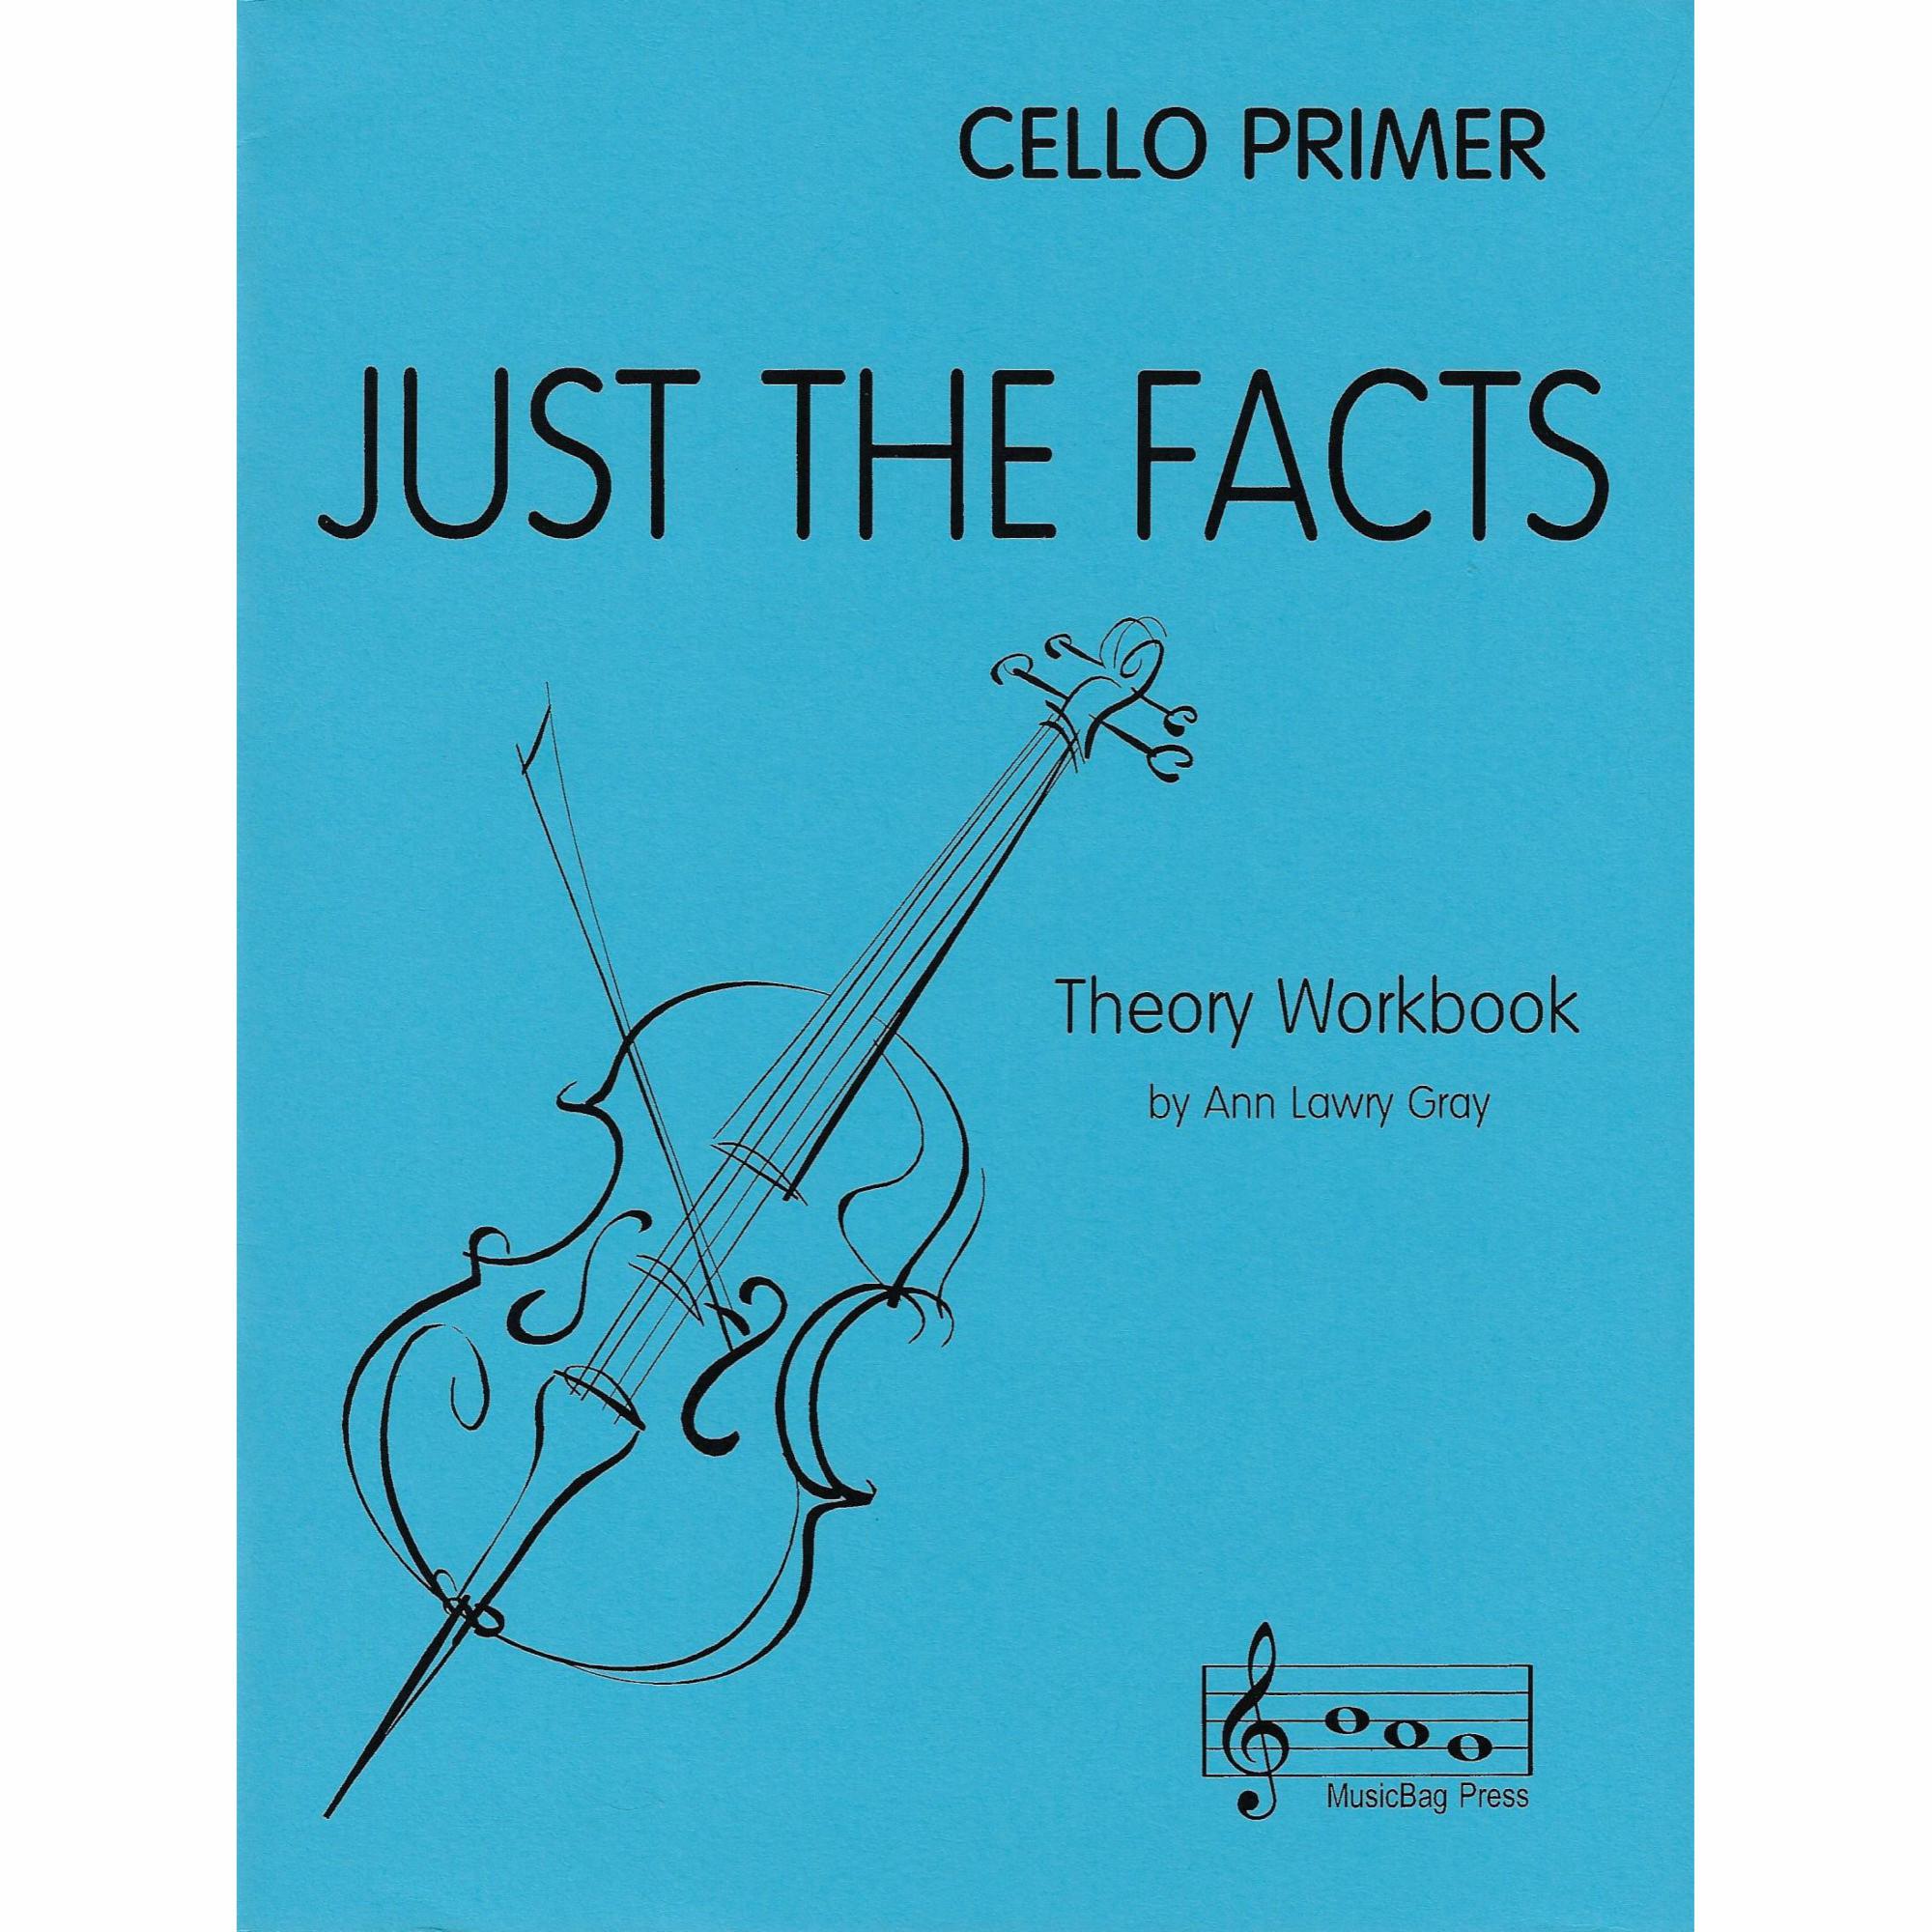 Just the Facts: Theory Workbooks for Cello